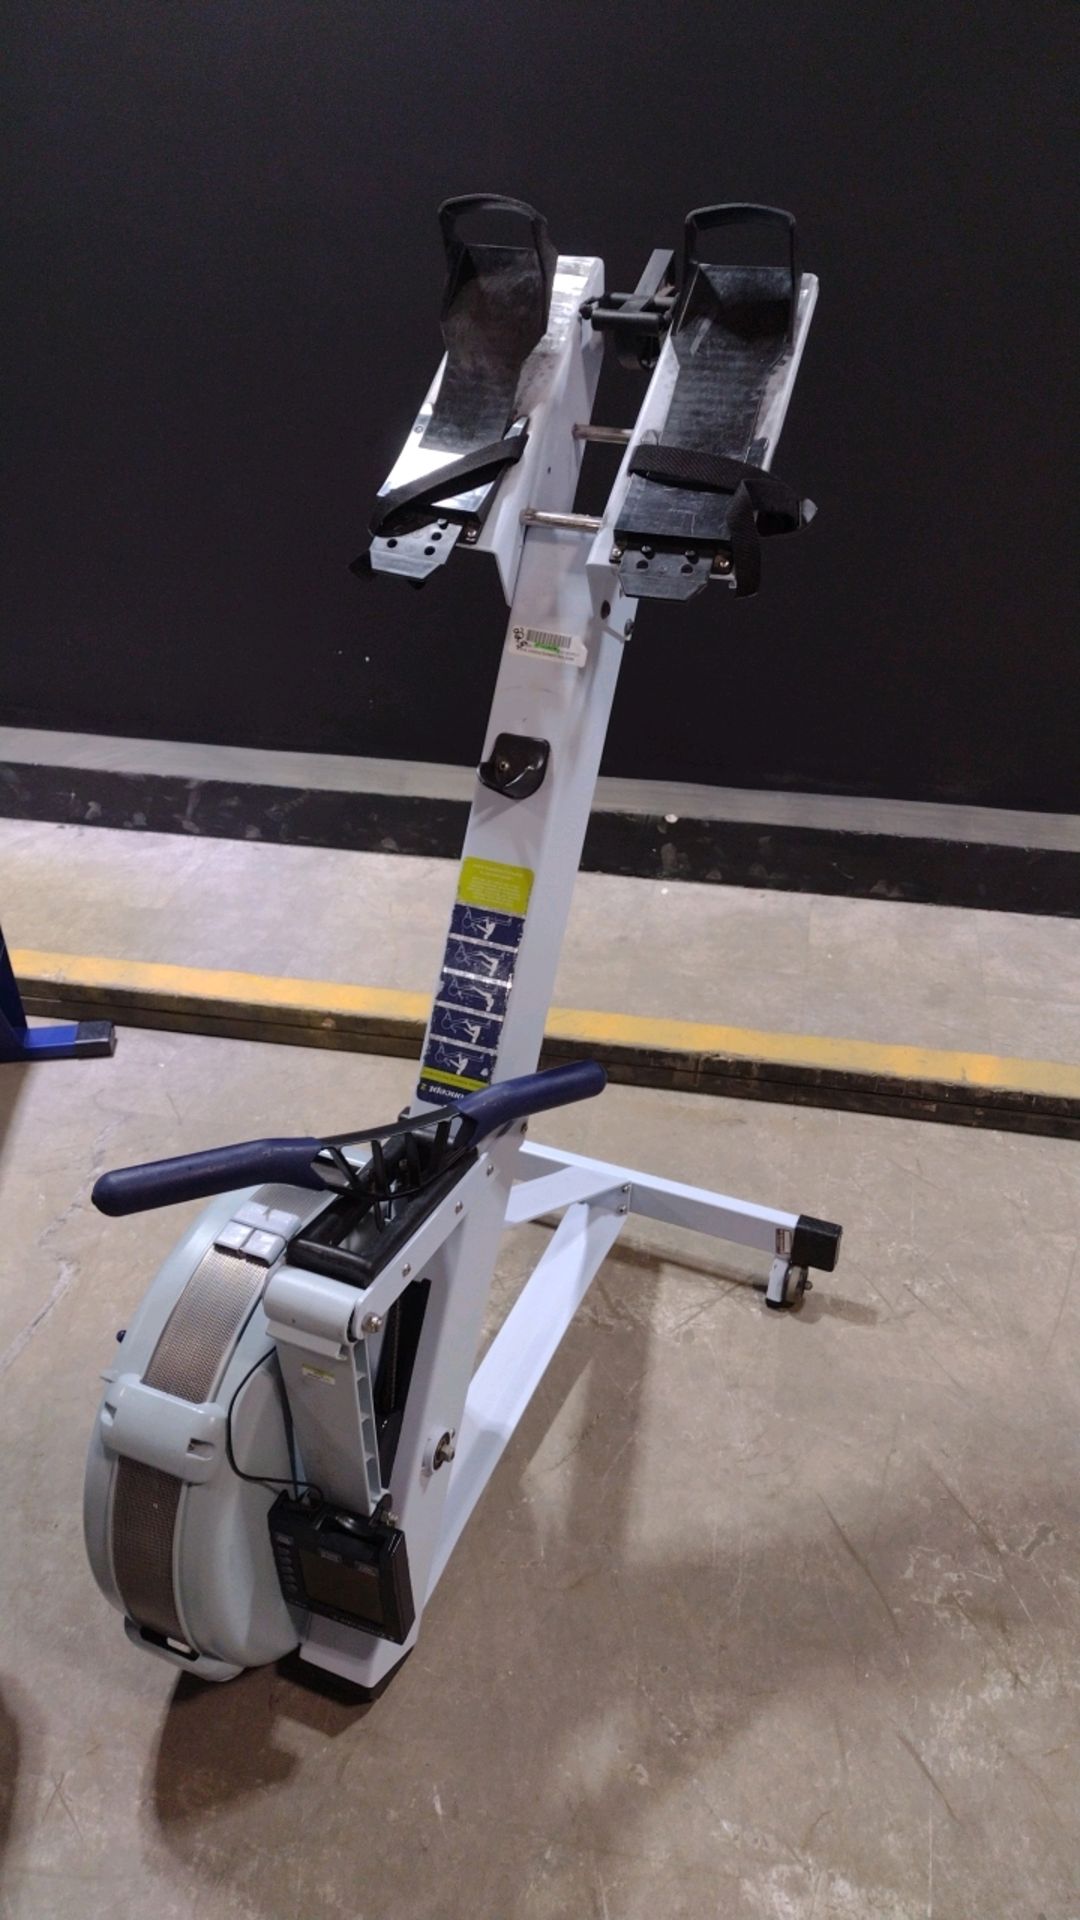 CONCEPT II INDOOR ROWER (LOCATED AT 2440 GREENLEAF AVE, ELK GROVE VILLAGE, IL 60007) - Image 2 of 3